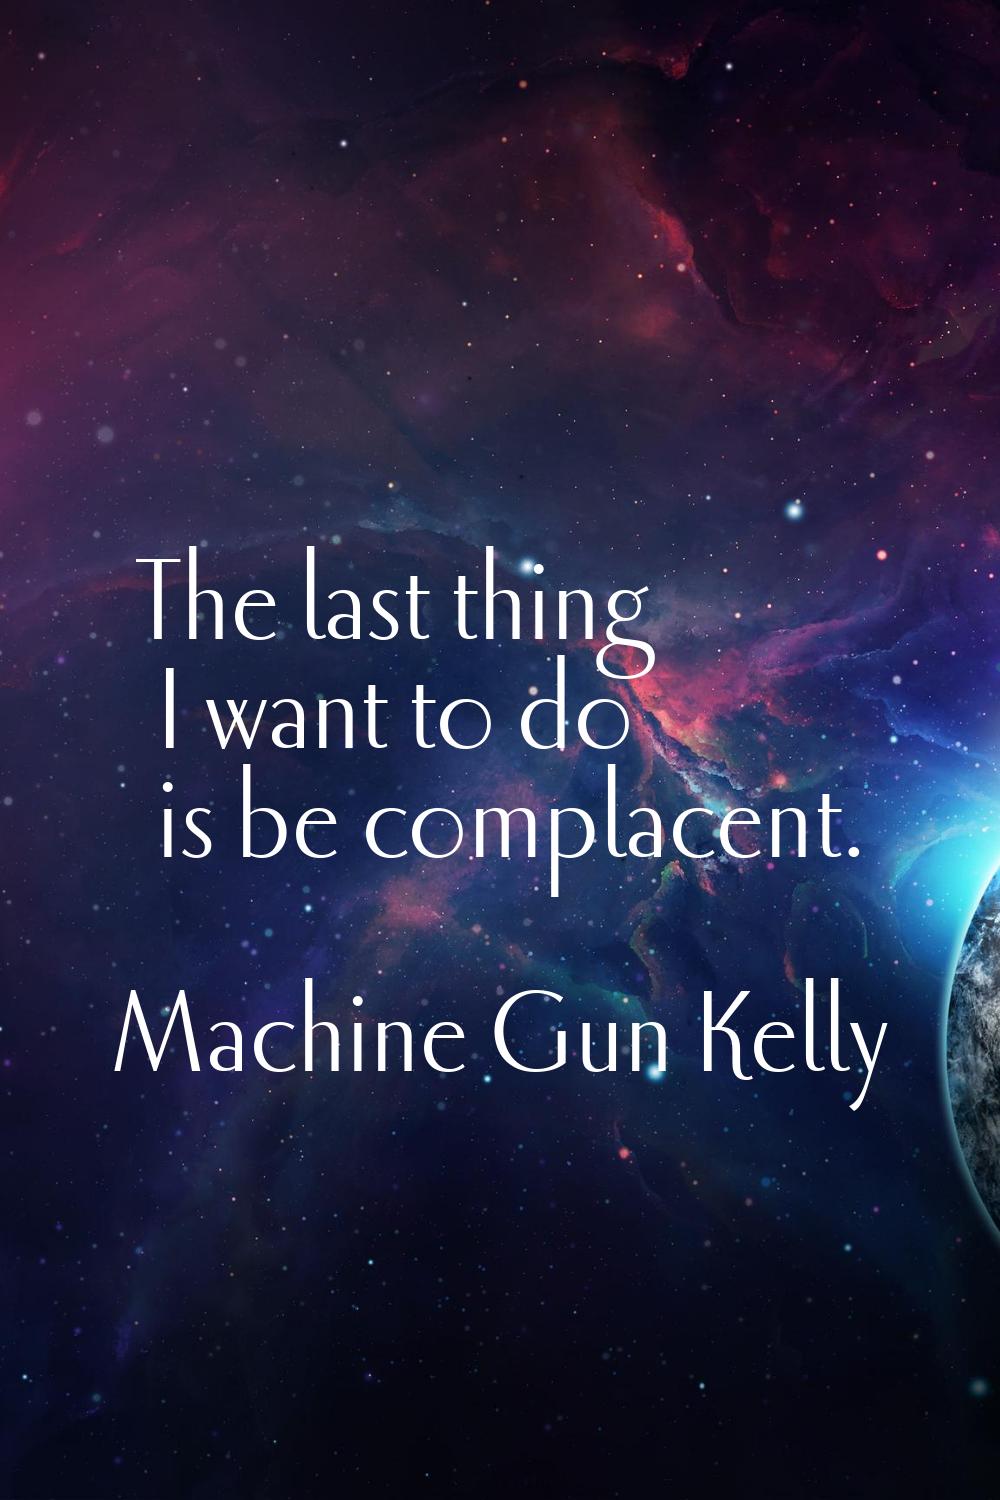 The last thing I want to do is be complacent.